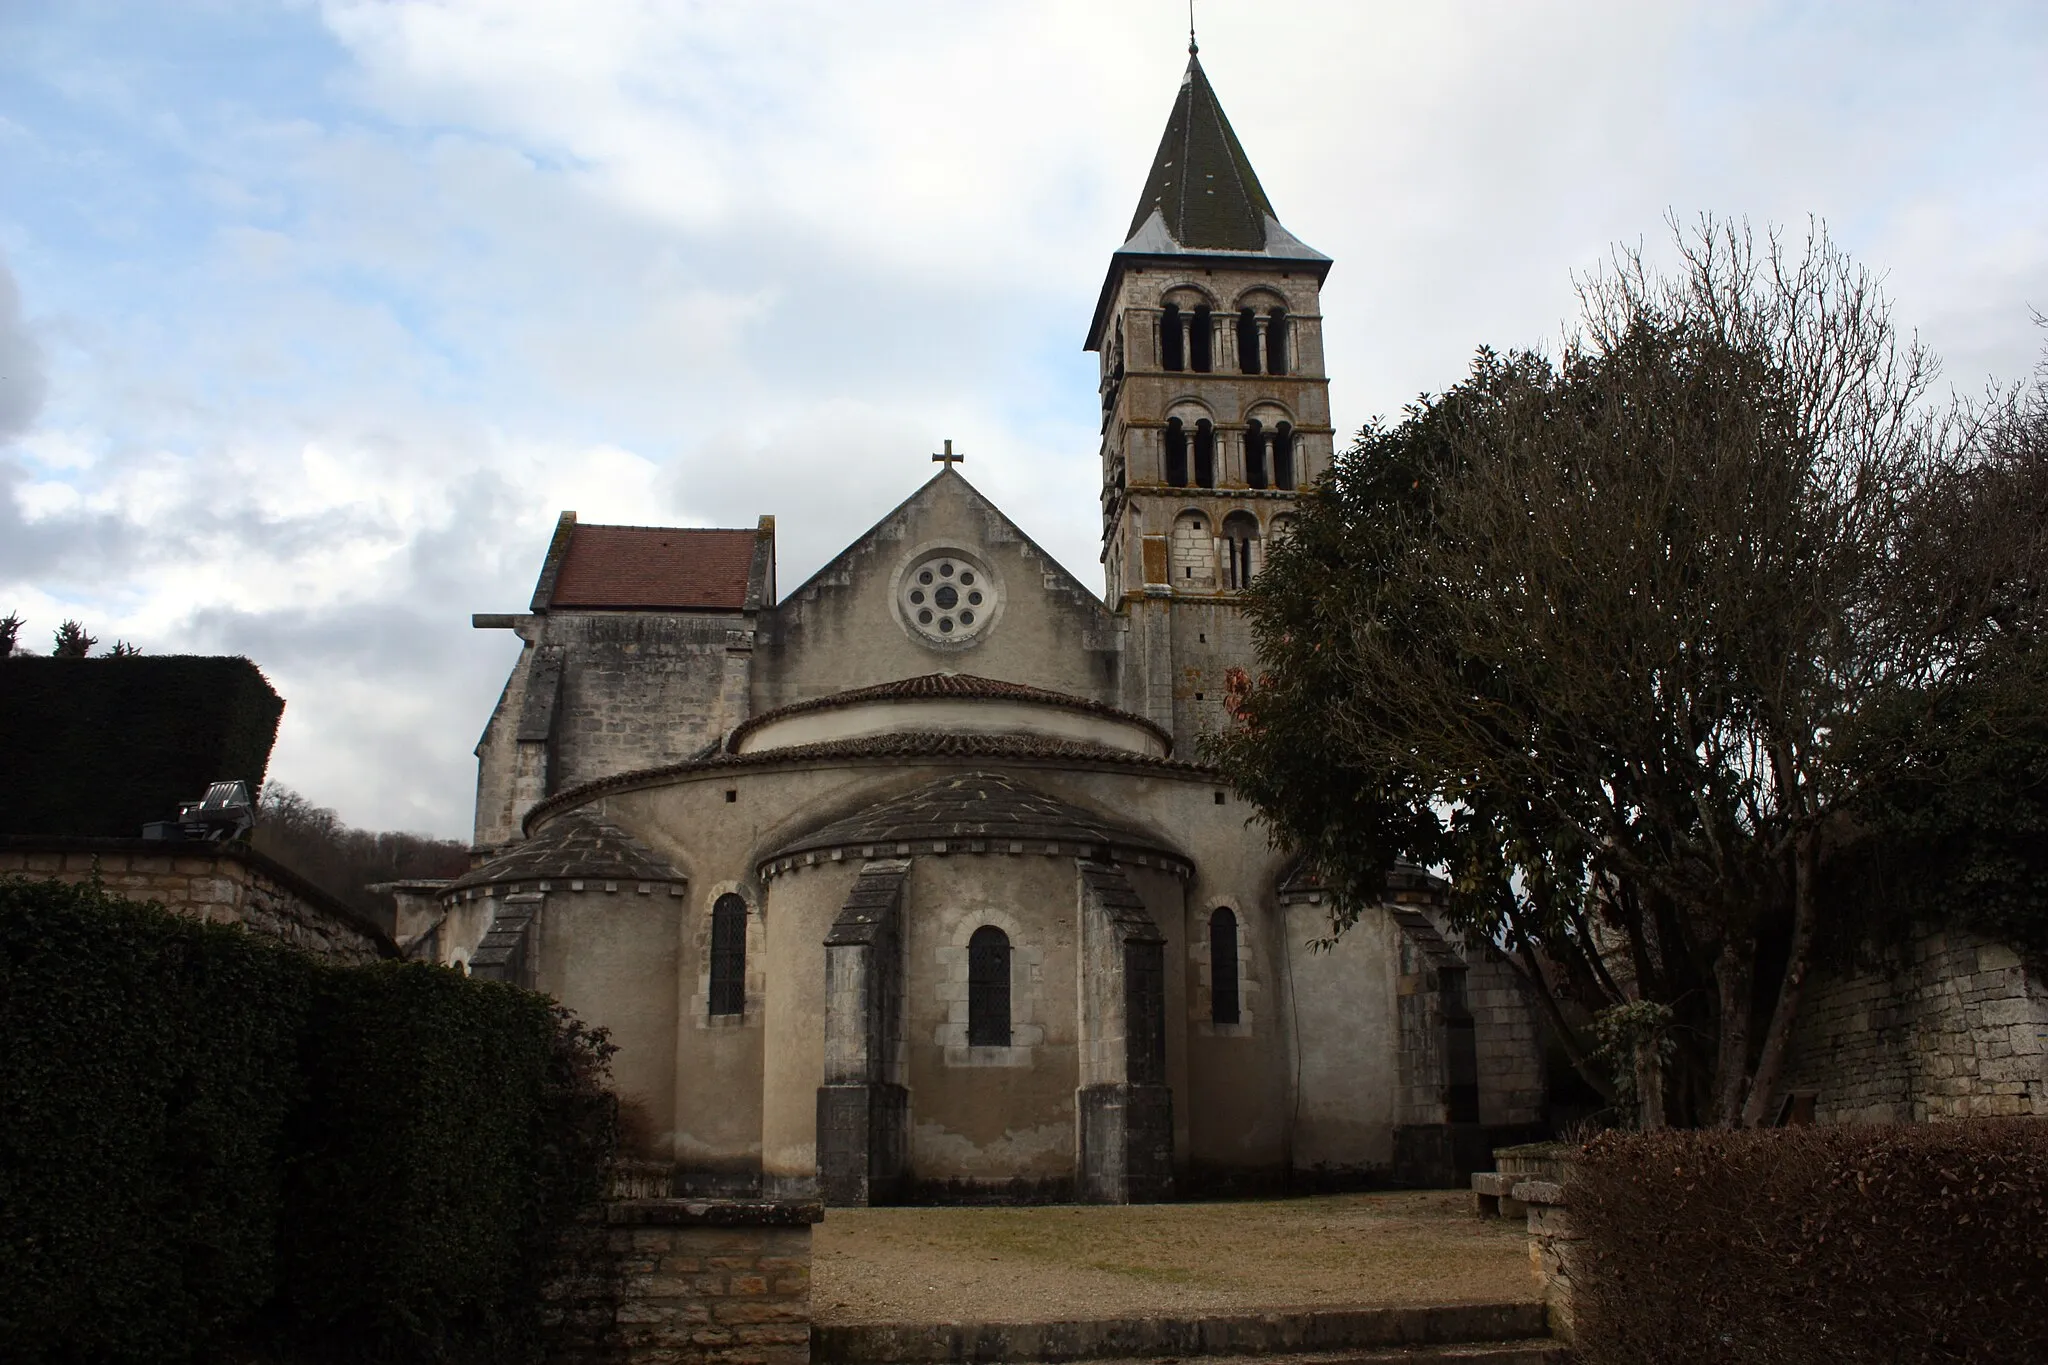 Photo showing: Apse of the St. Stephen's Church, view from the garden.